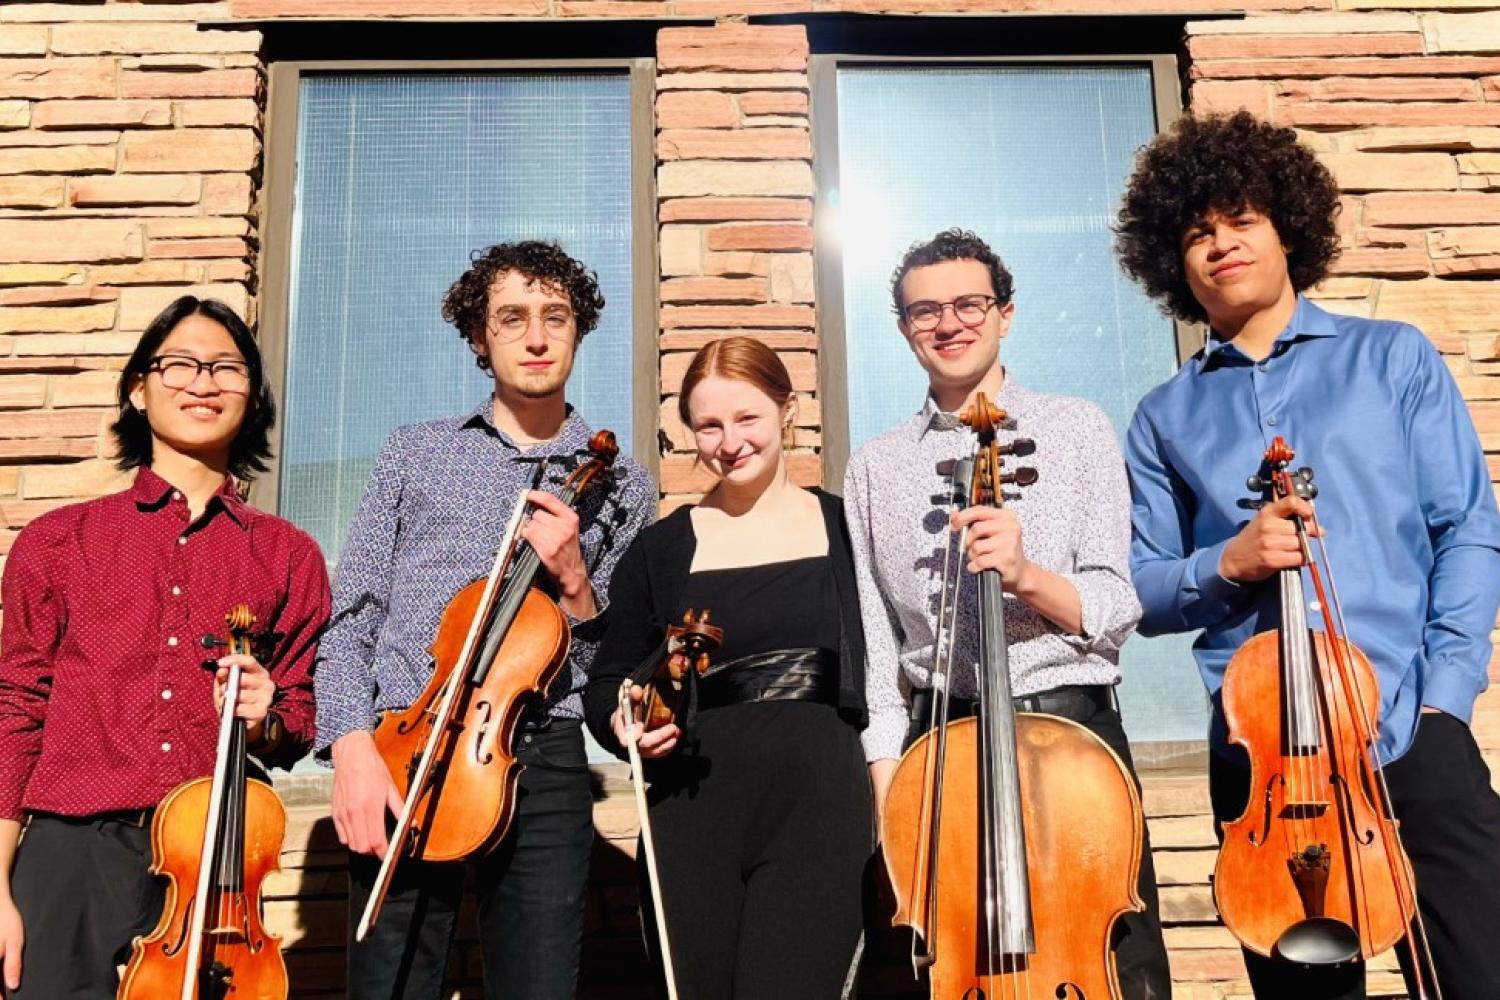 The Gardetto Quintet standing in front of a building on the CU Boulder campus while holding their string instruments.